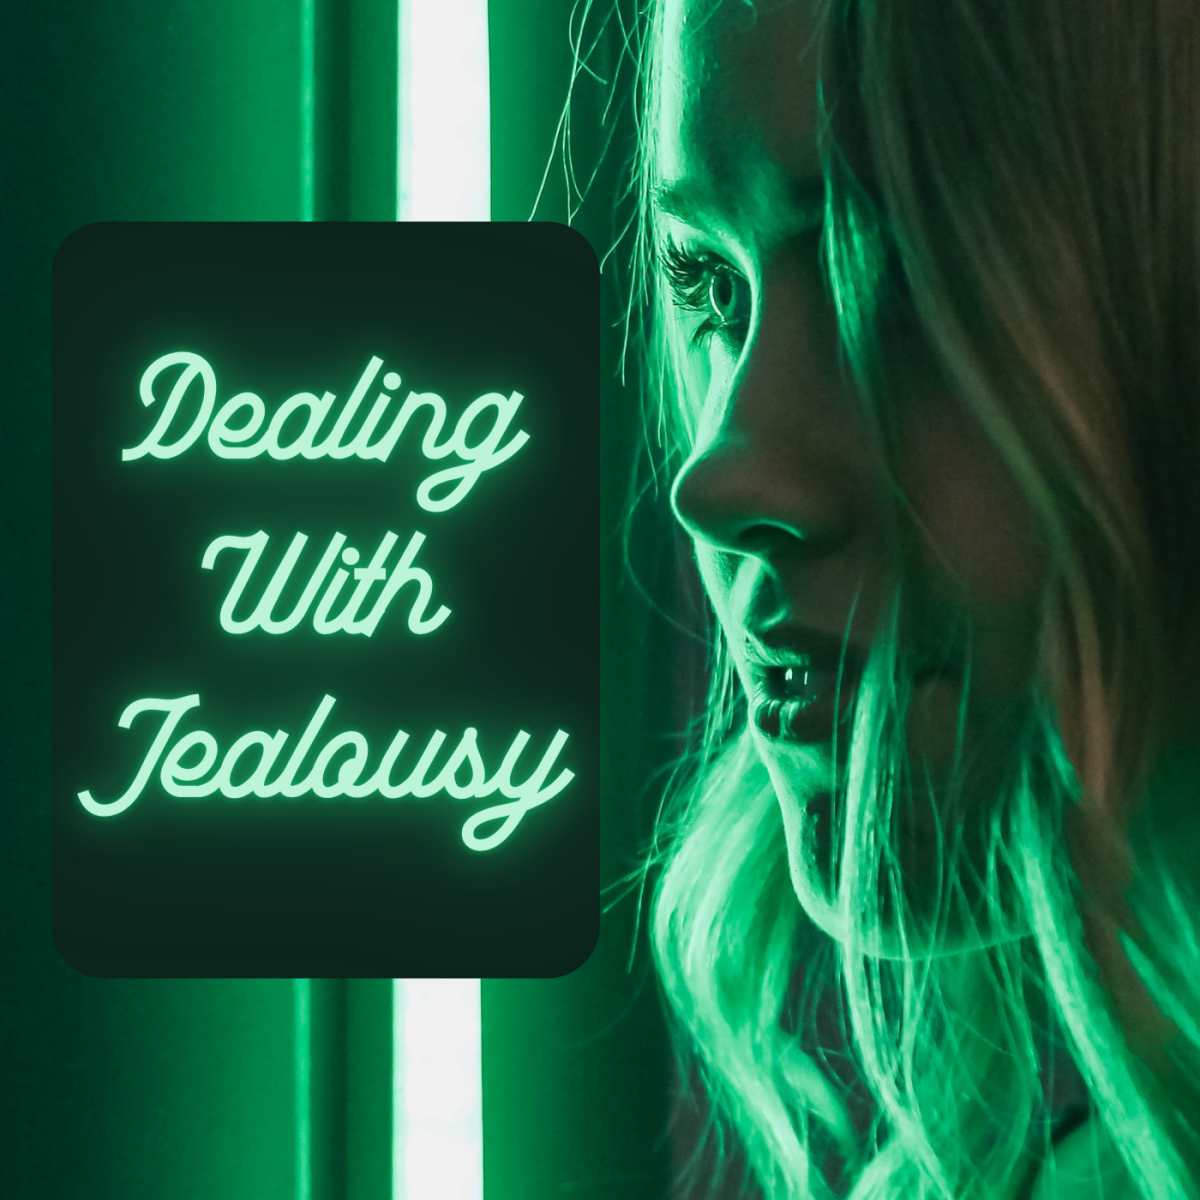 This Girl Is Jealous of Me: How to Deal With Jealous Women